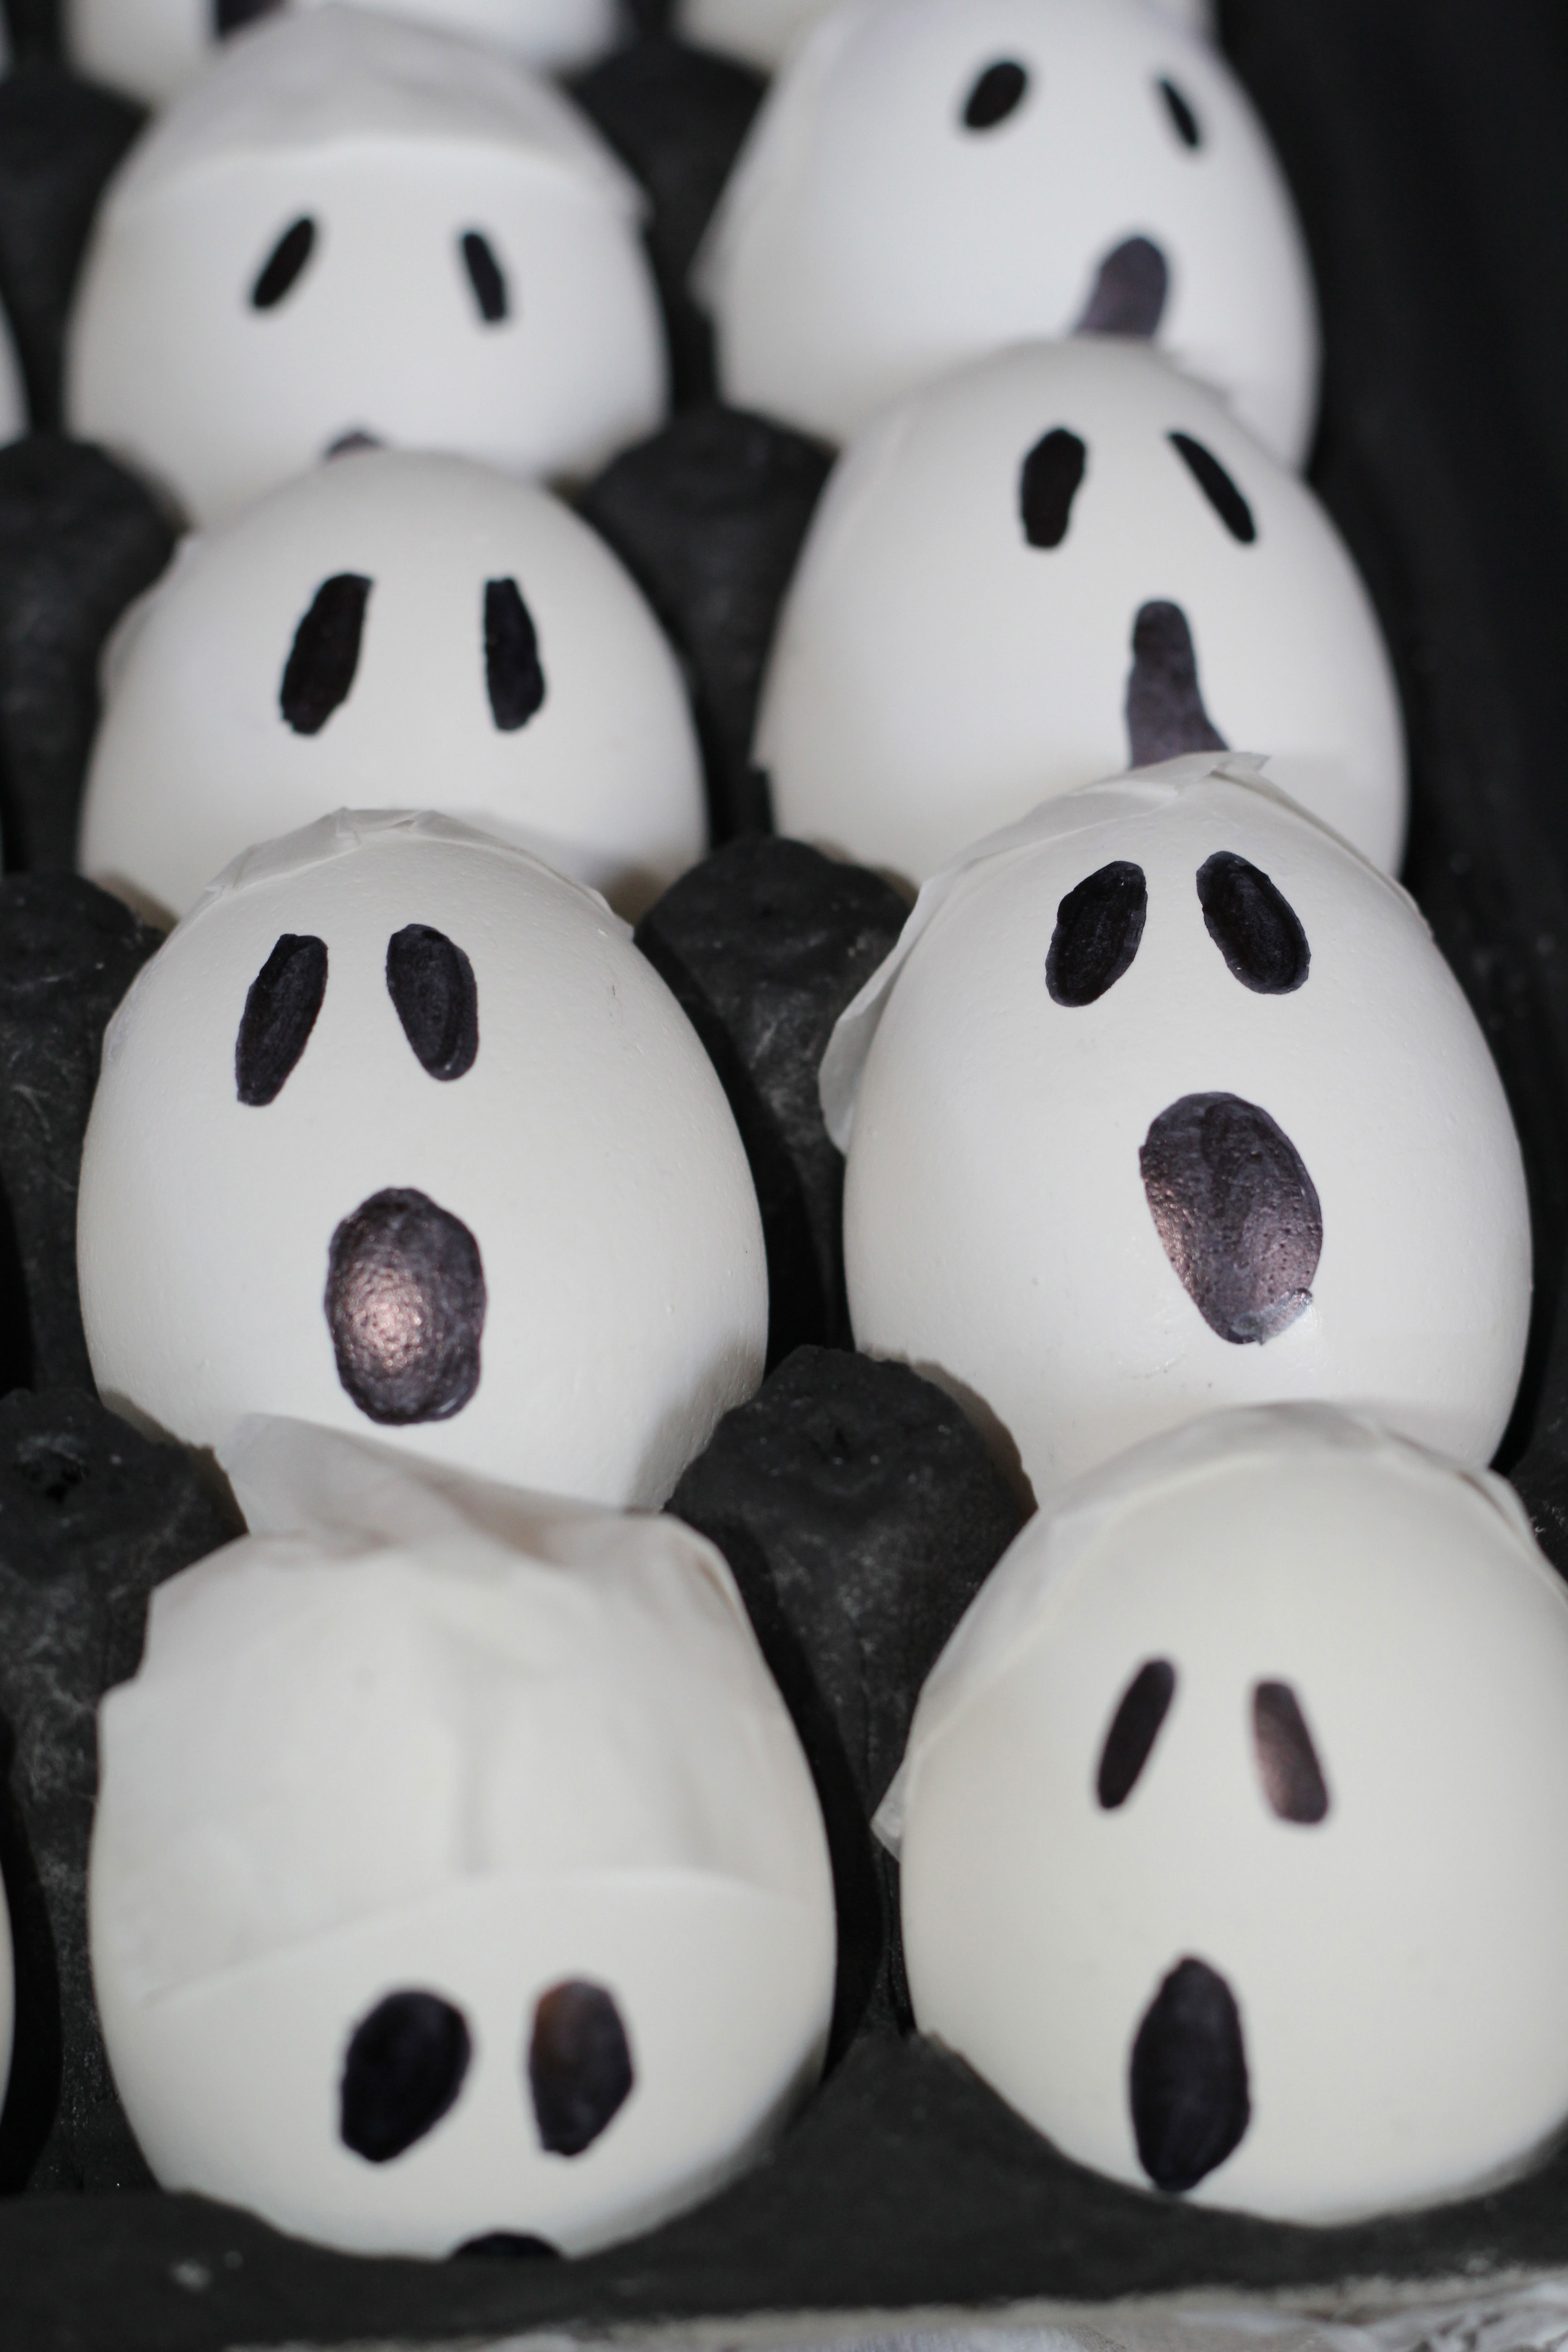 Make these fun ghost bombs with hollowed out egg shells and Talcum Powder. Your kids will love them!